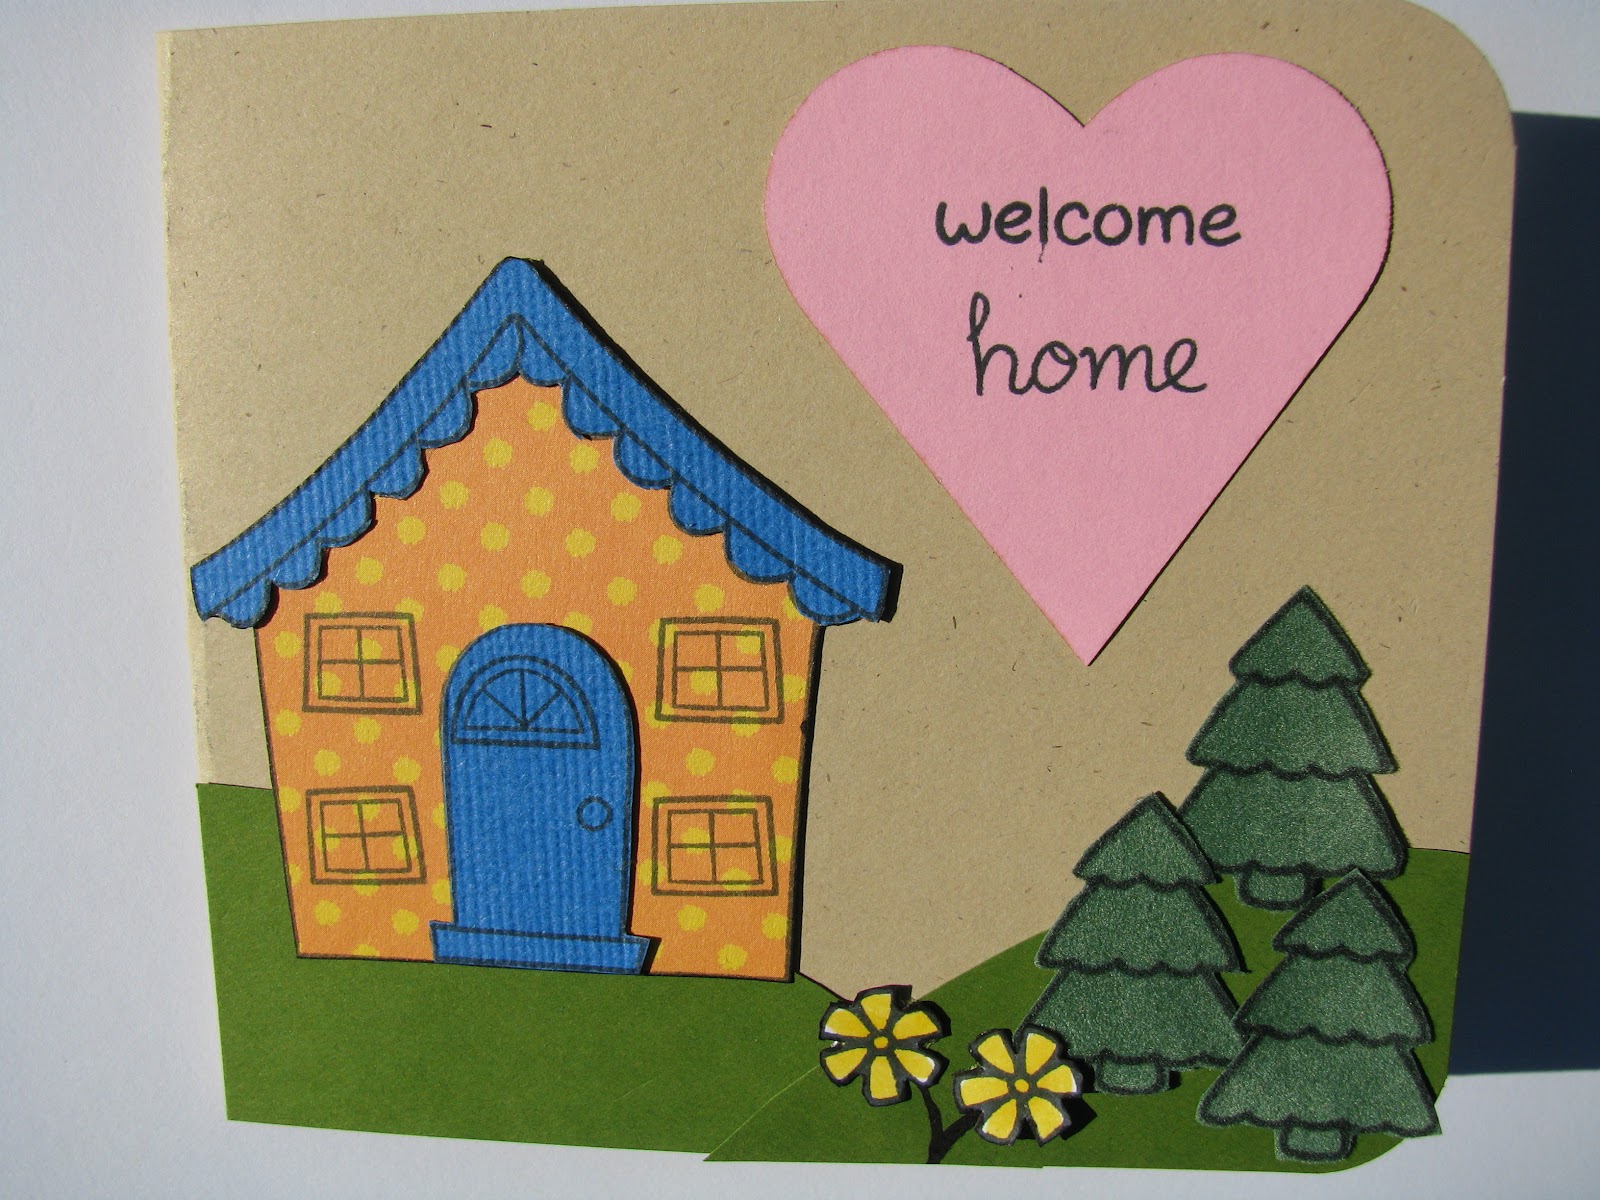 puppy-kisses-and-paper-dreams-welcome-home-card-09-21-2012